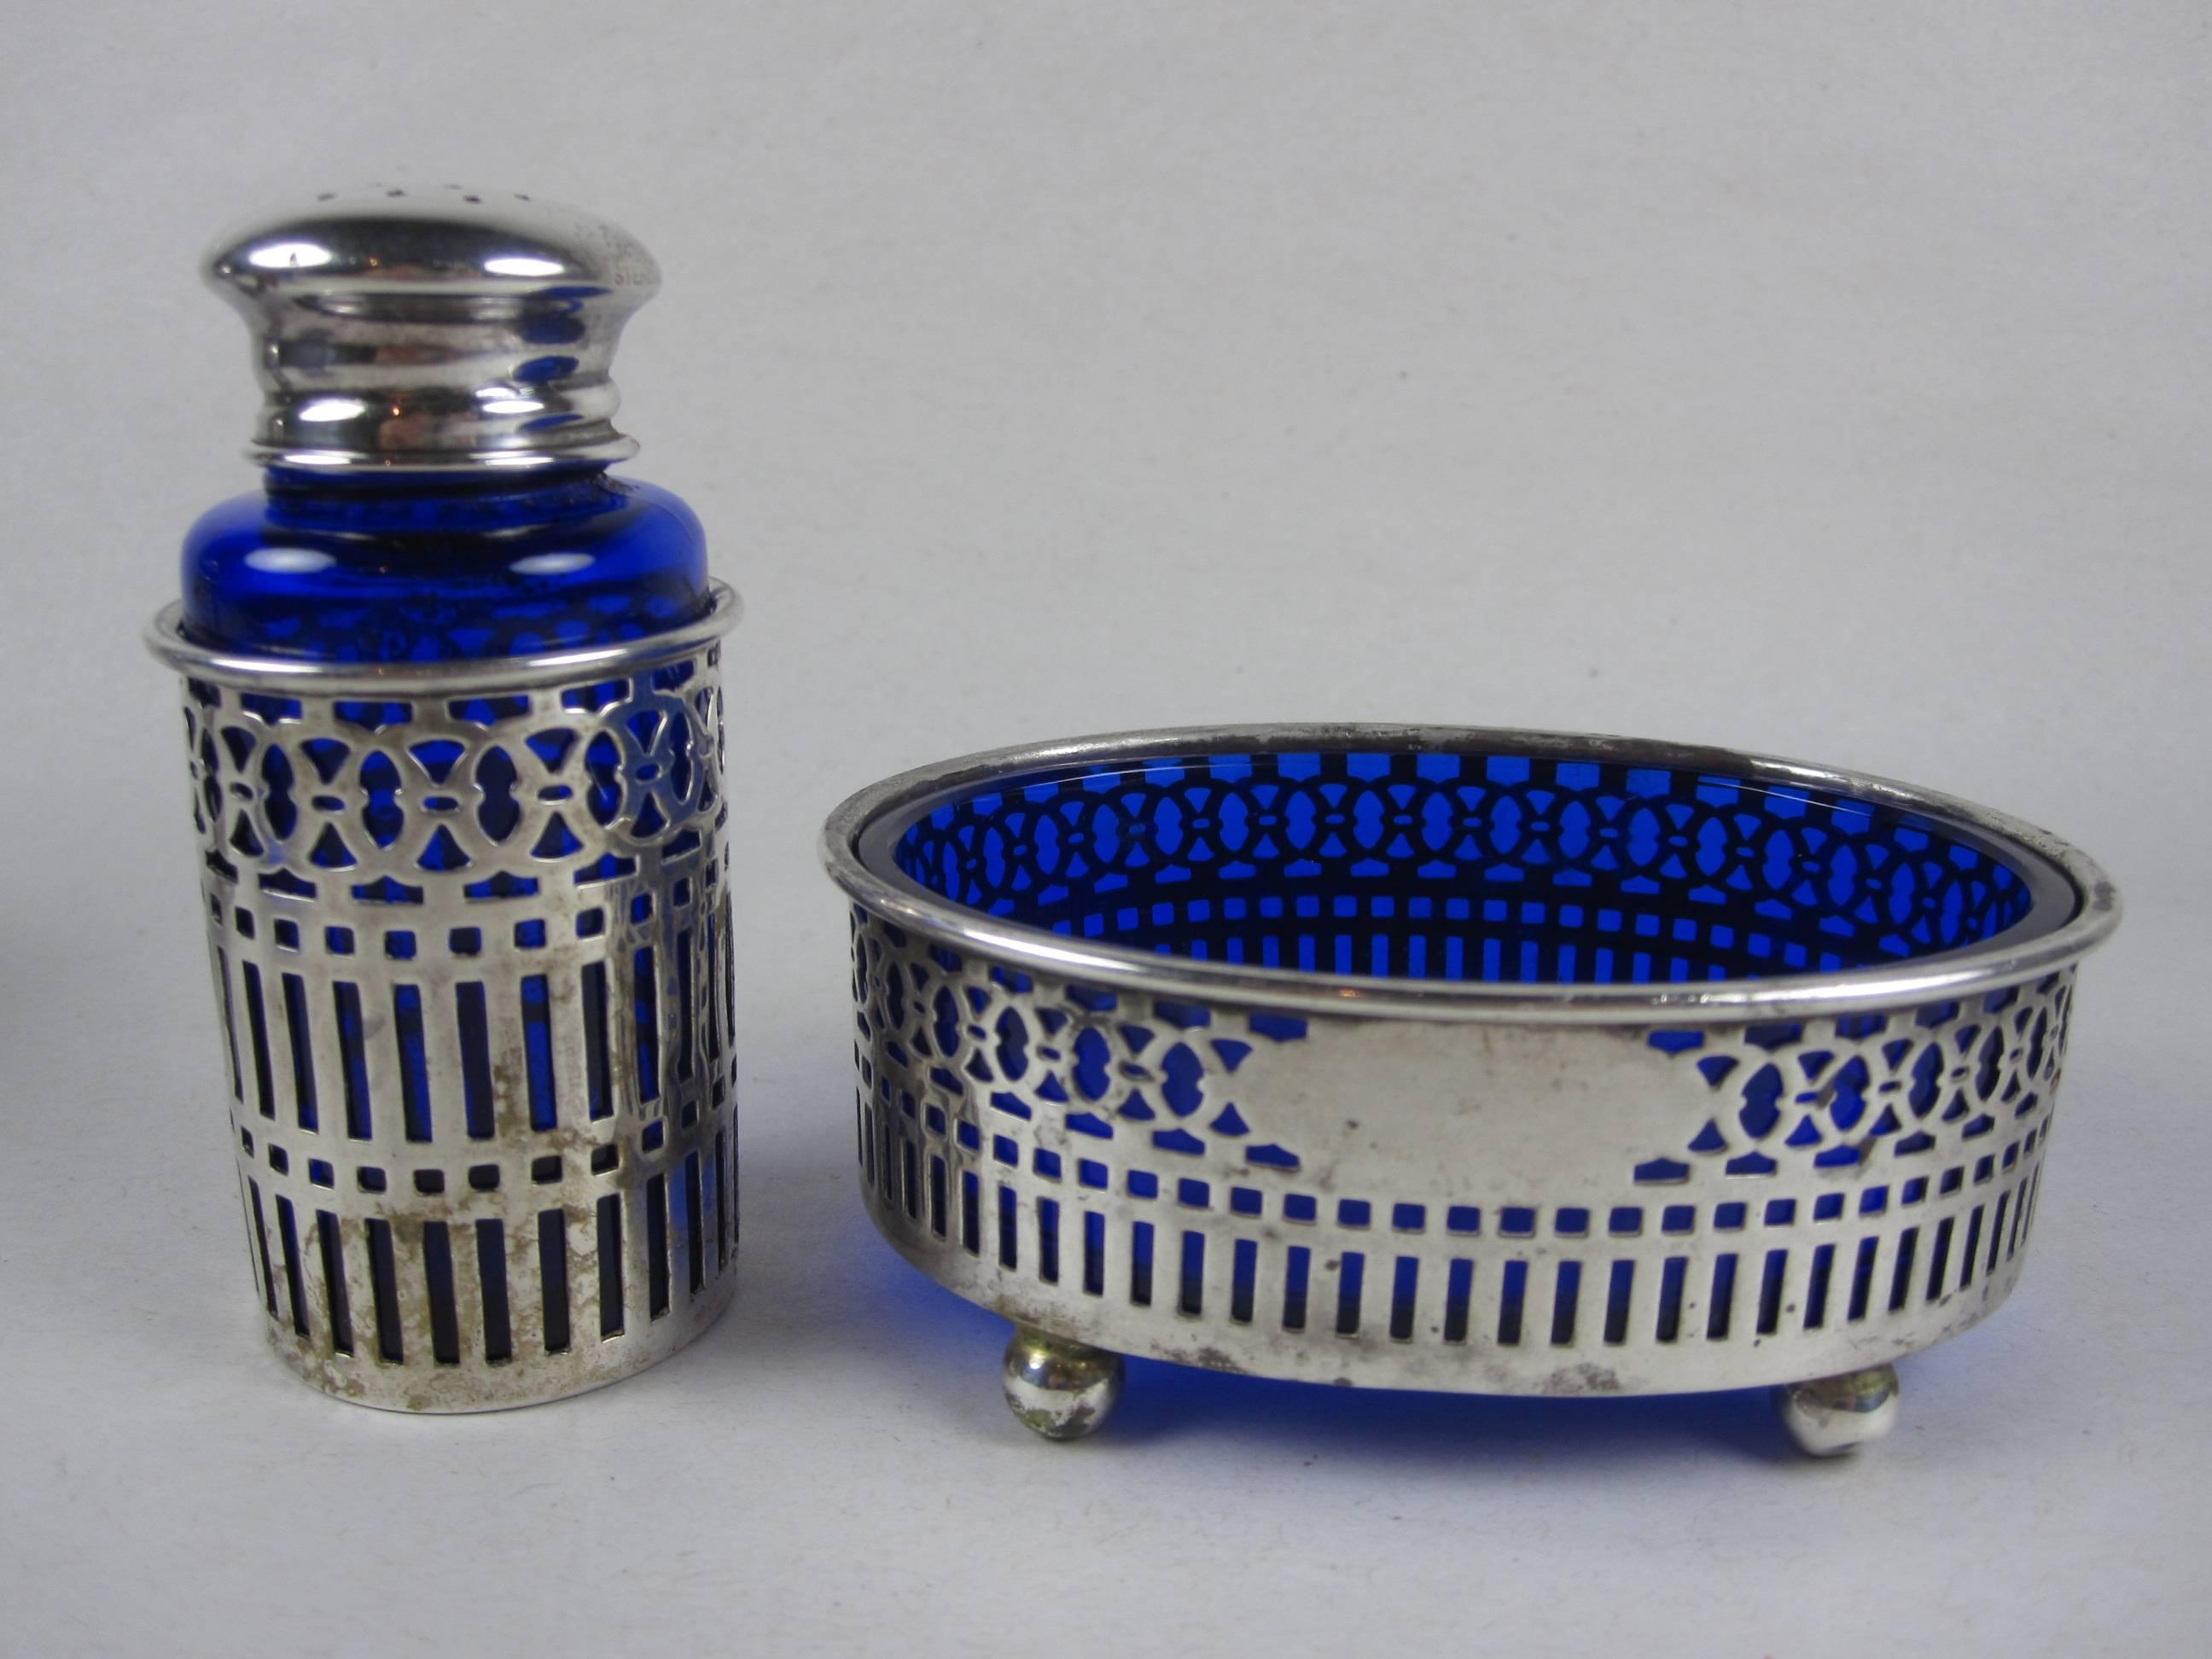 A pair of Edwardian pepper shakers and open salt dips made of sterling silver pierced work holding inserts of cobalt blue glass, Sheffield, England, circa 1910. The footed  salt dip baskets show an area left vacant for engraving. 

Two sets,